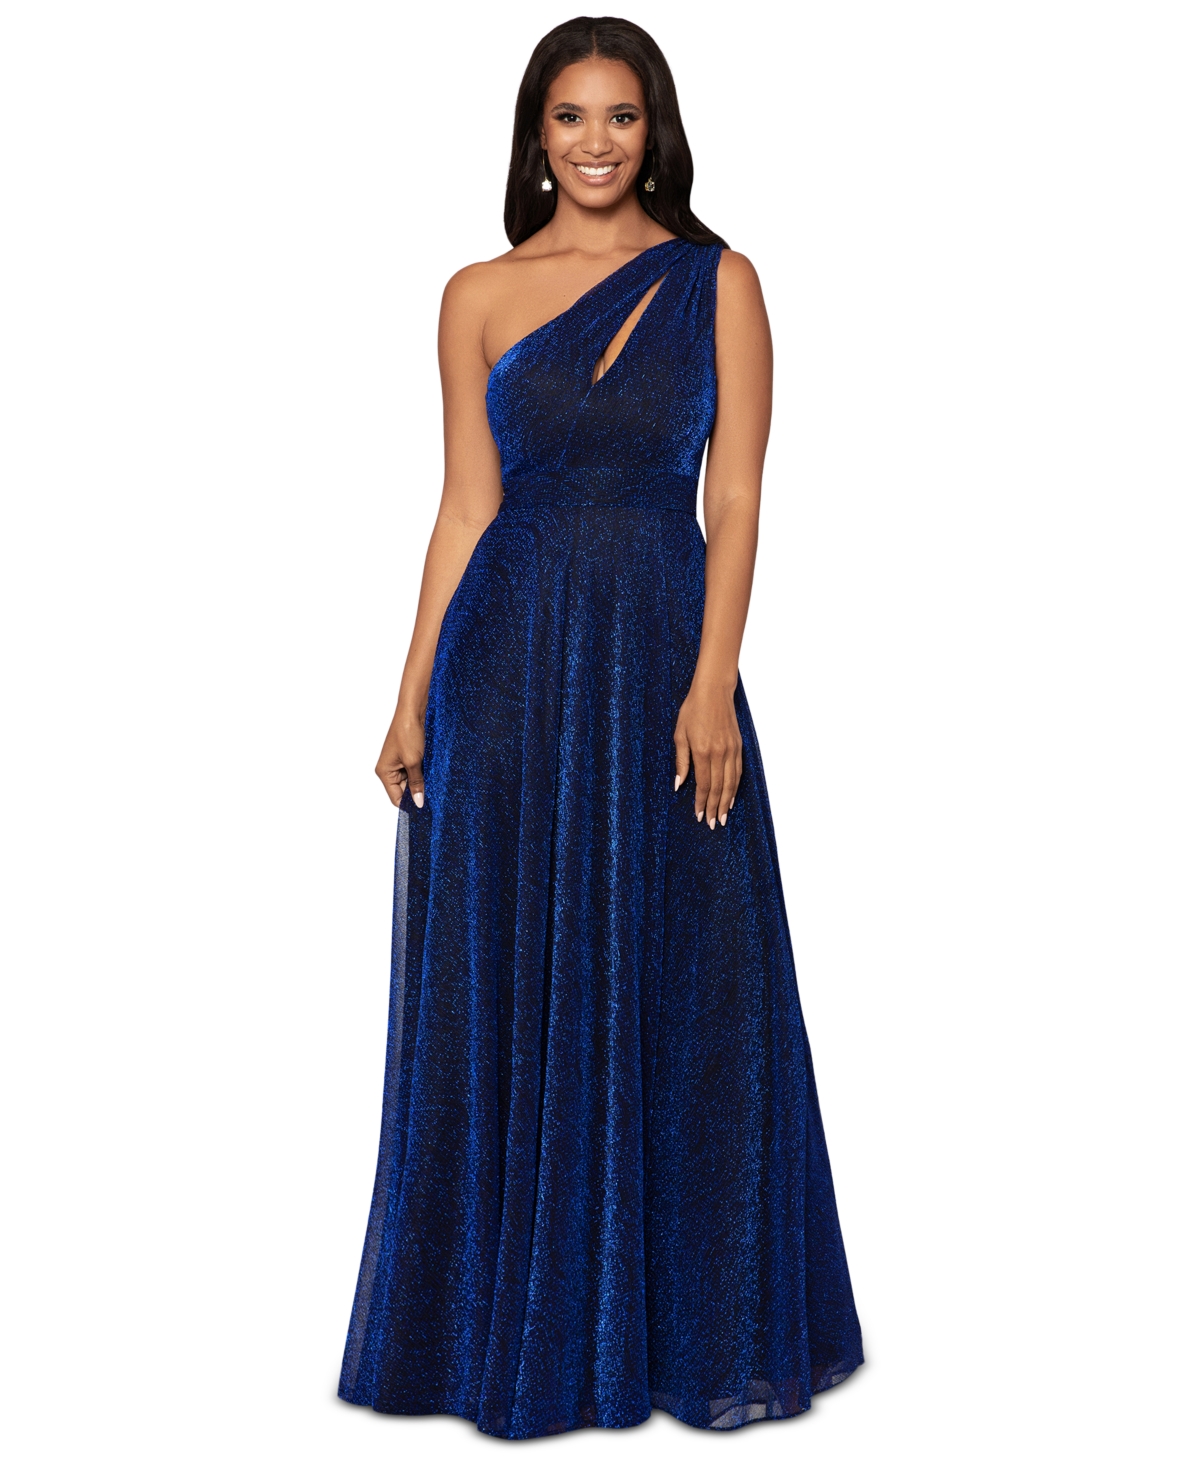 Women's Glitter One-Shoulder Cut-Out Gown - Royal